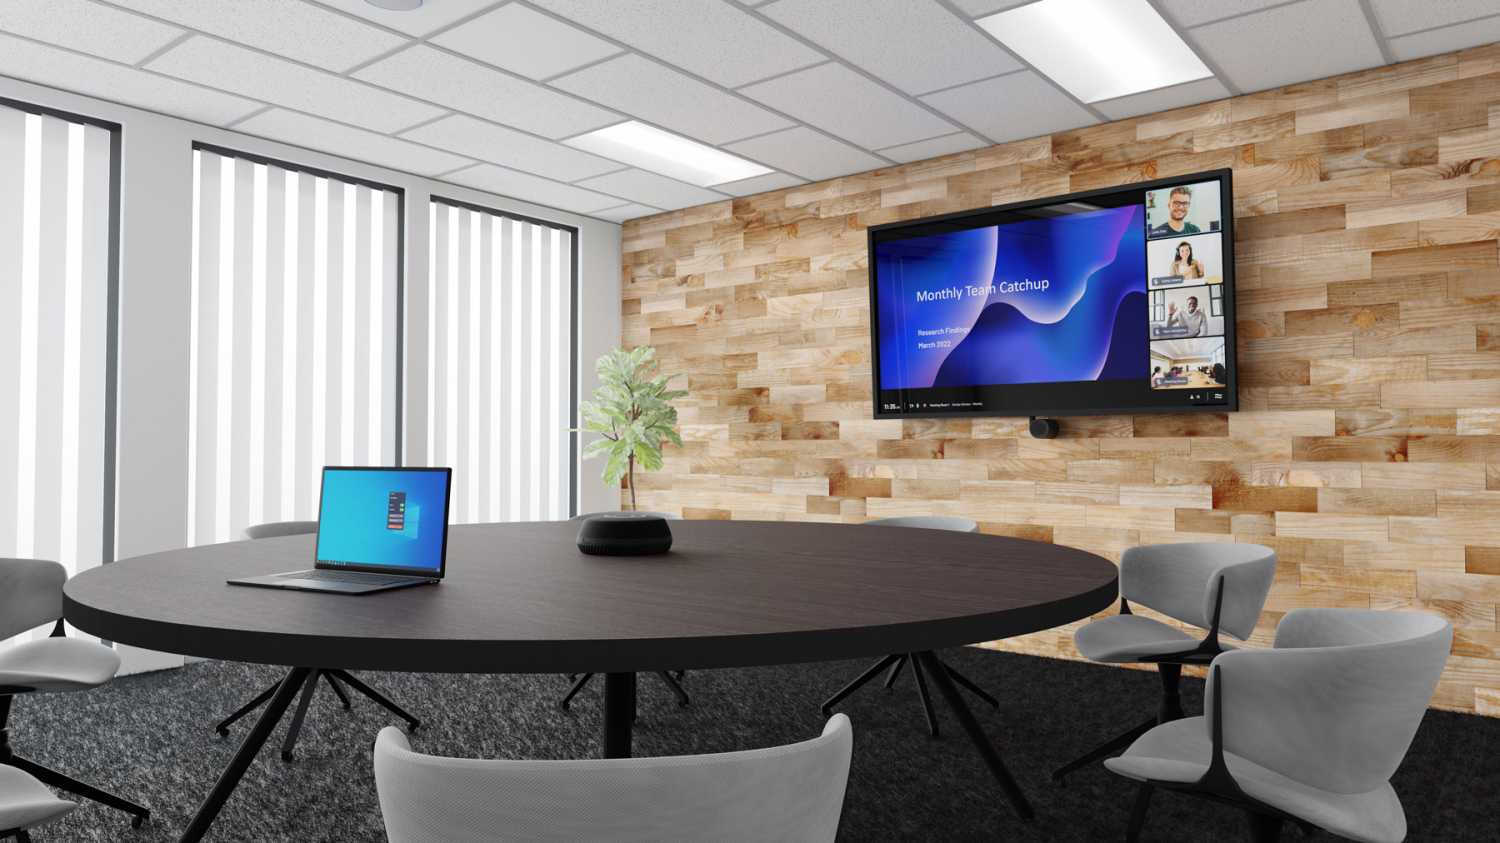 The partnership features seamless integration between Shure Stem Ecosystem devices and Airtame Hybrid Conferencing Solution